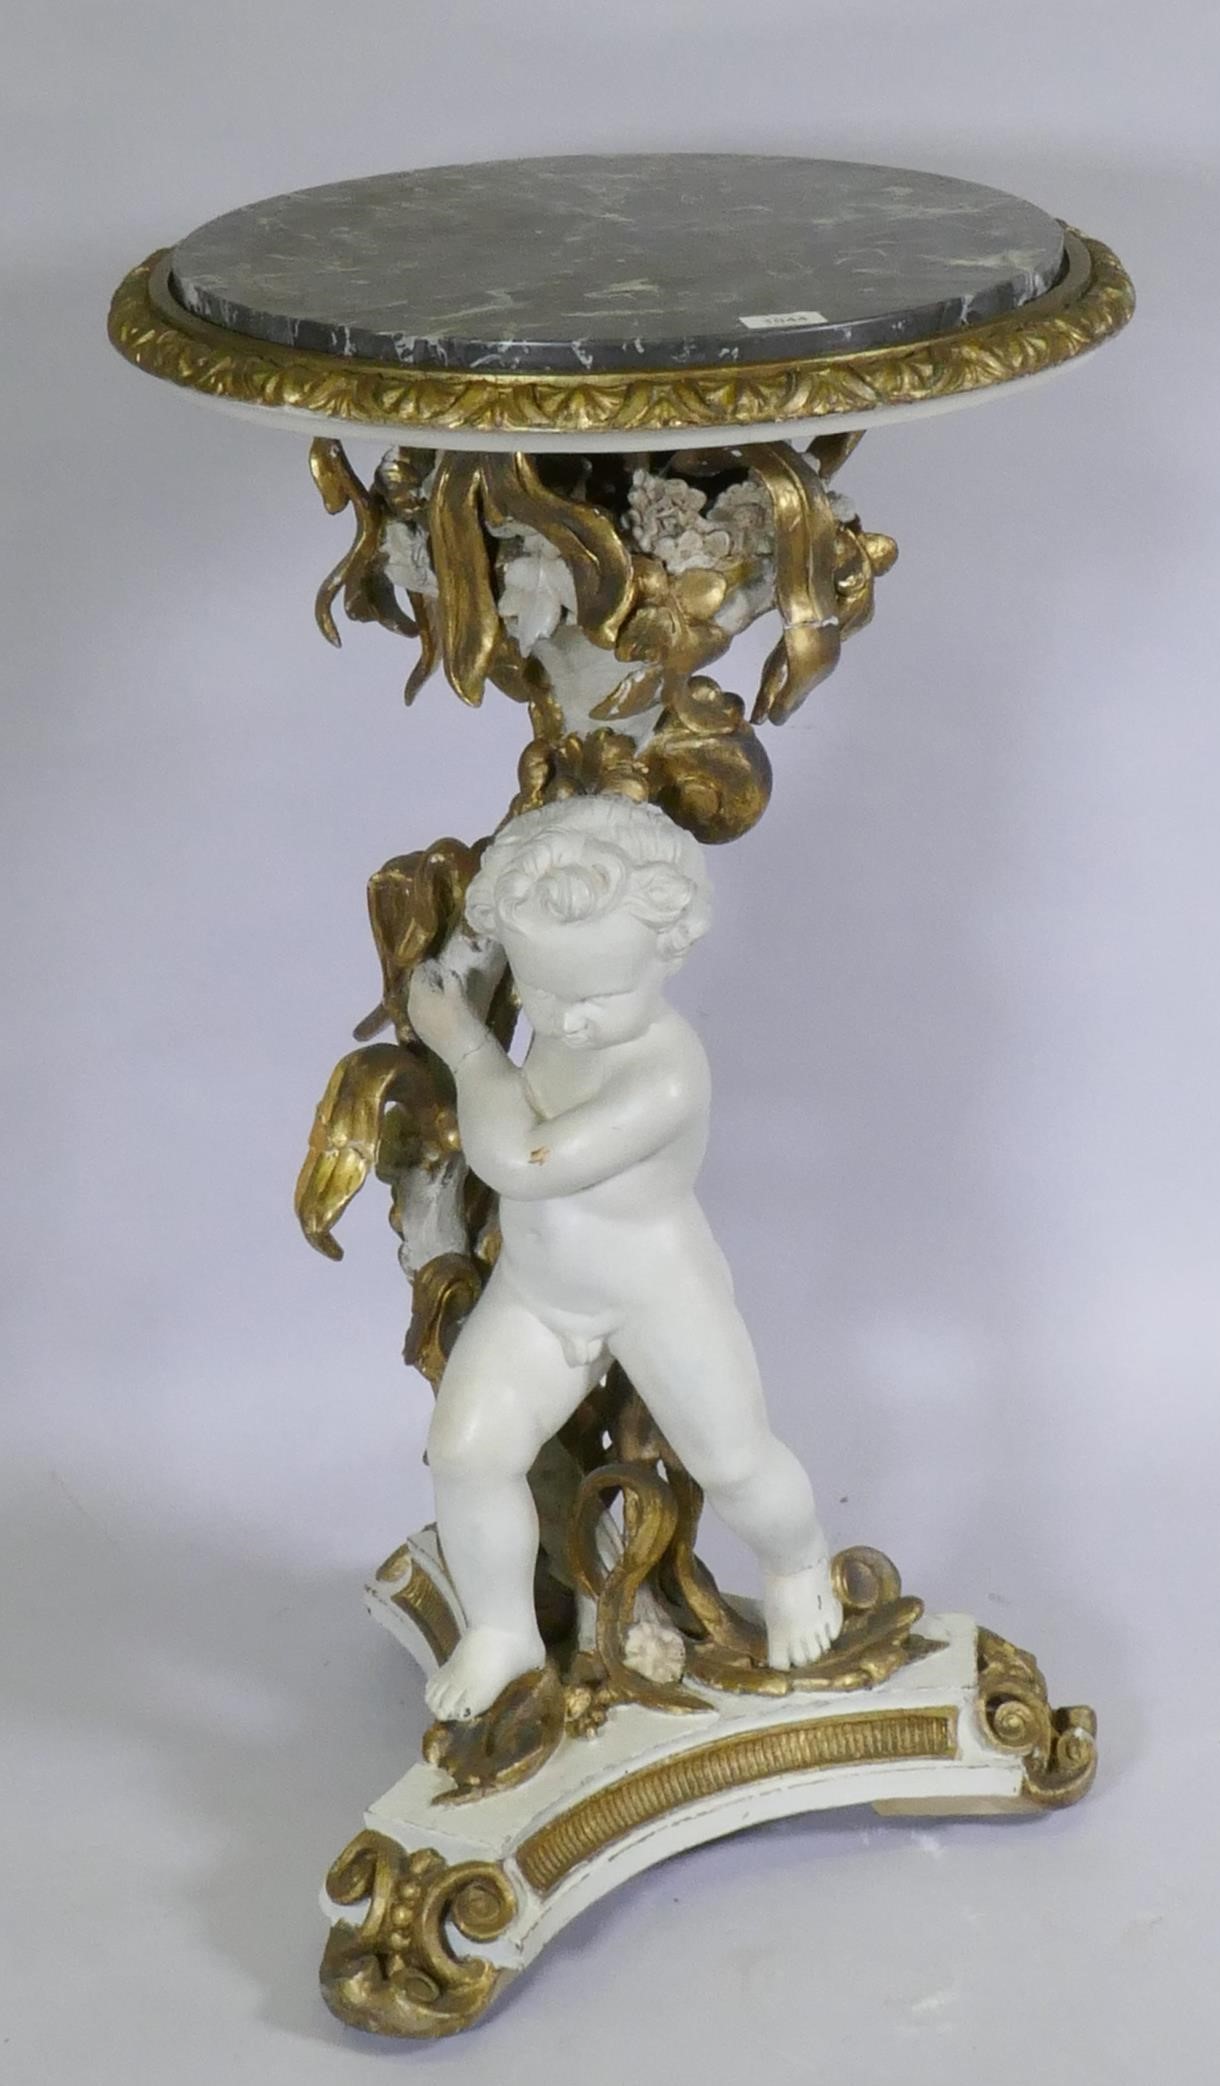 C19th Italian table/stand with painted and parcel gilt decoration in the form of a putto bearing a